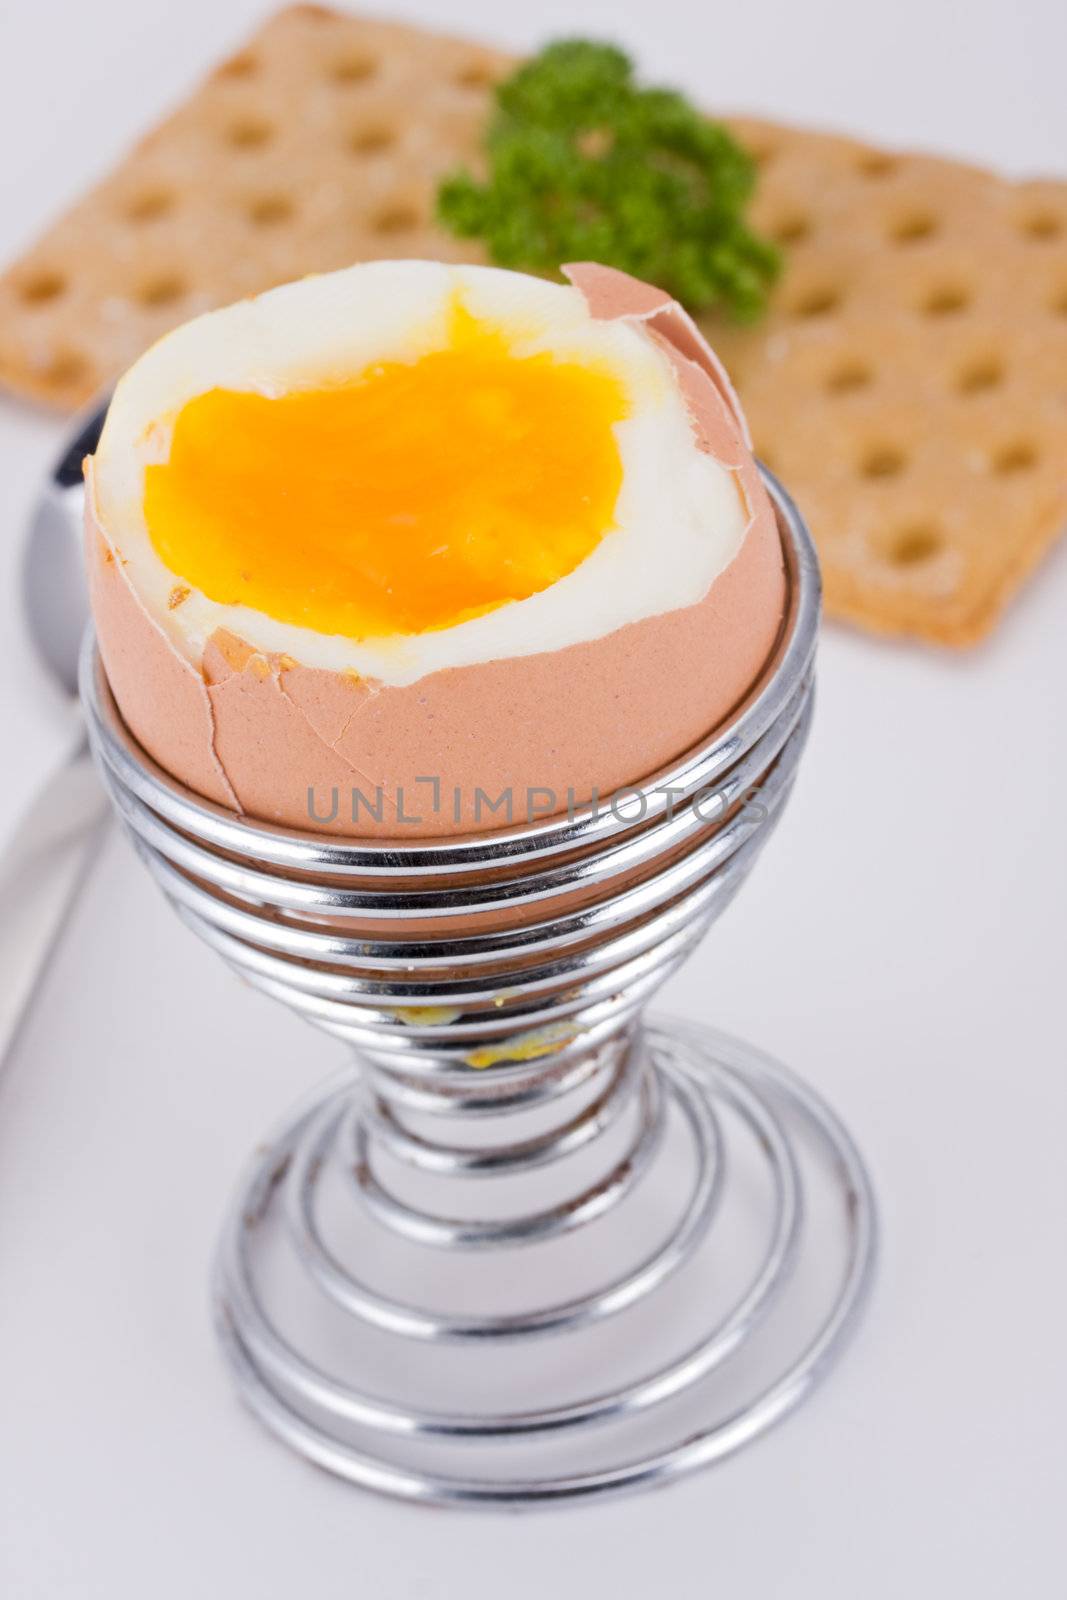 brown egg in an eggcup and crispbread by bernjuer